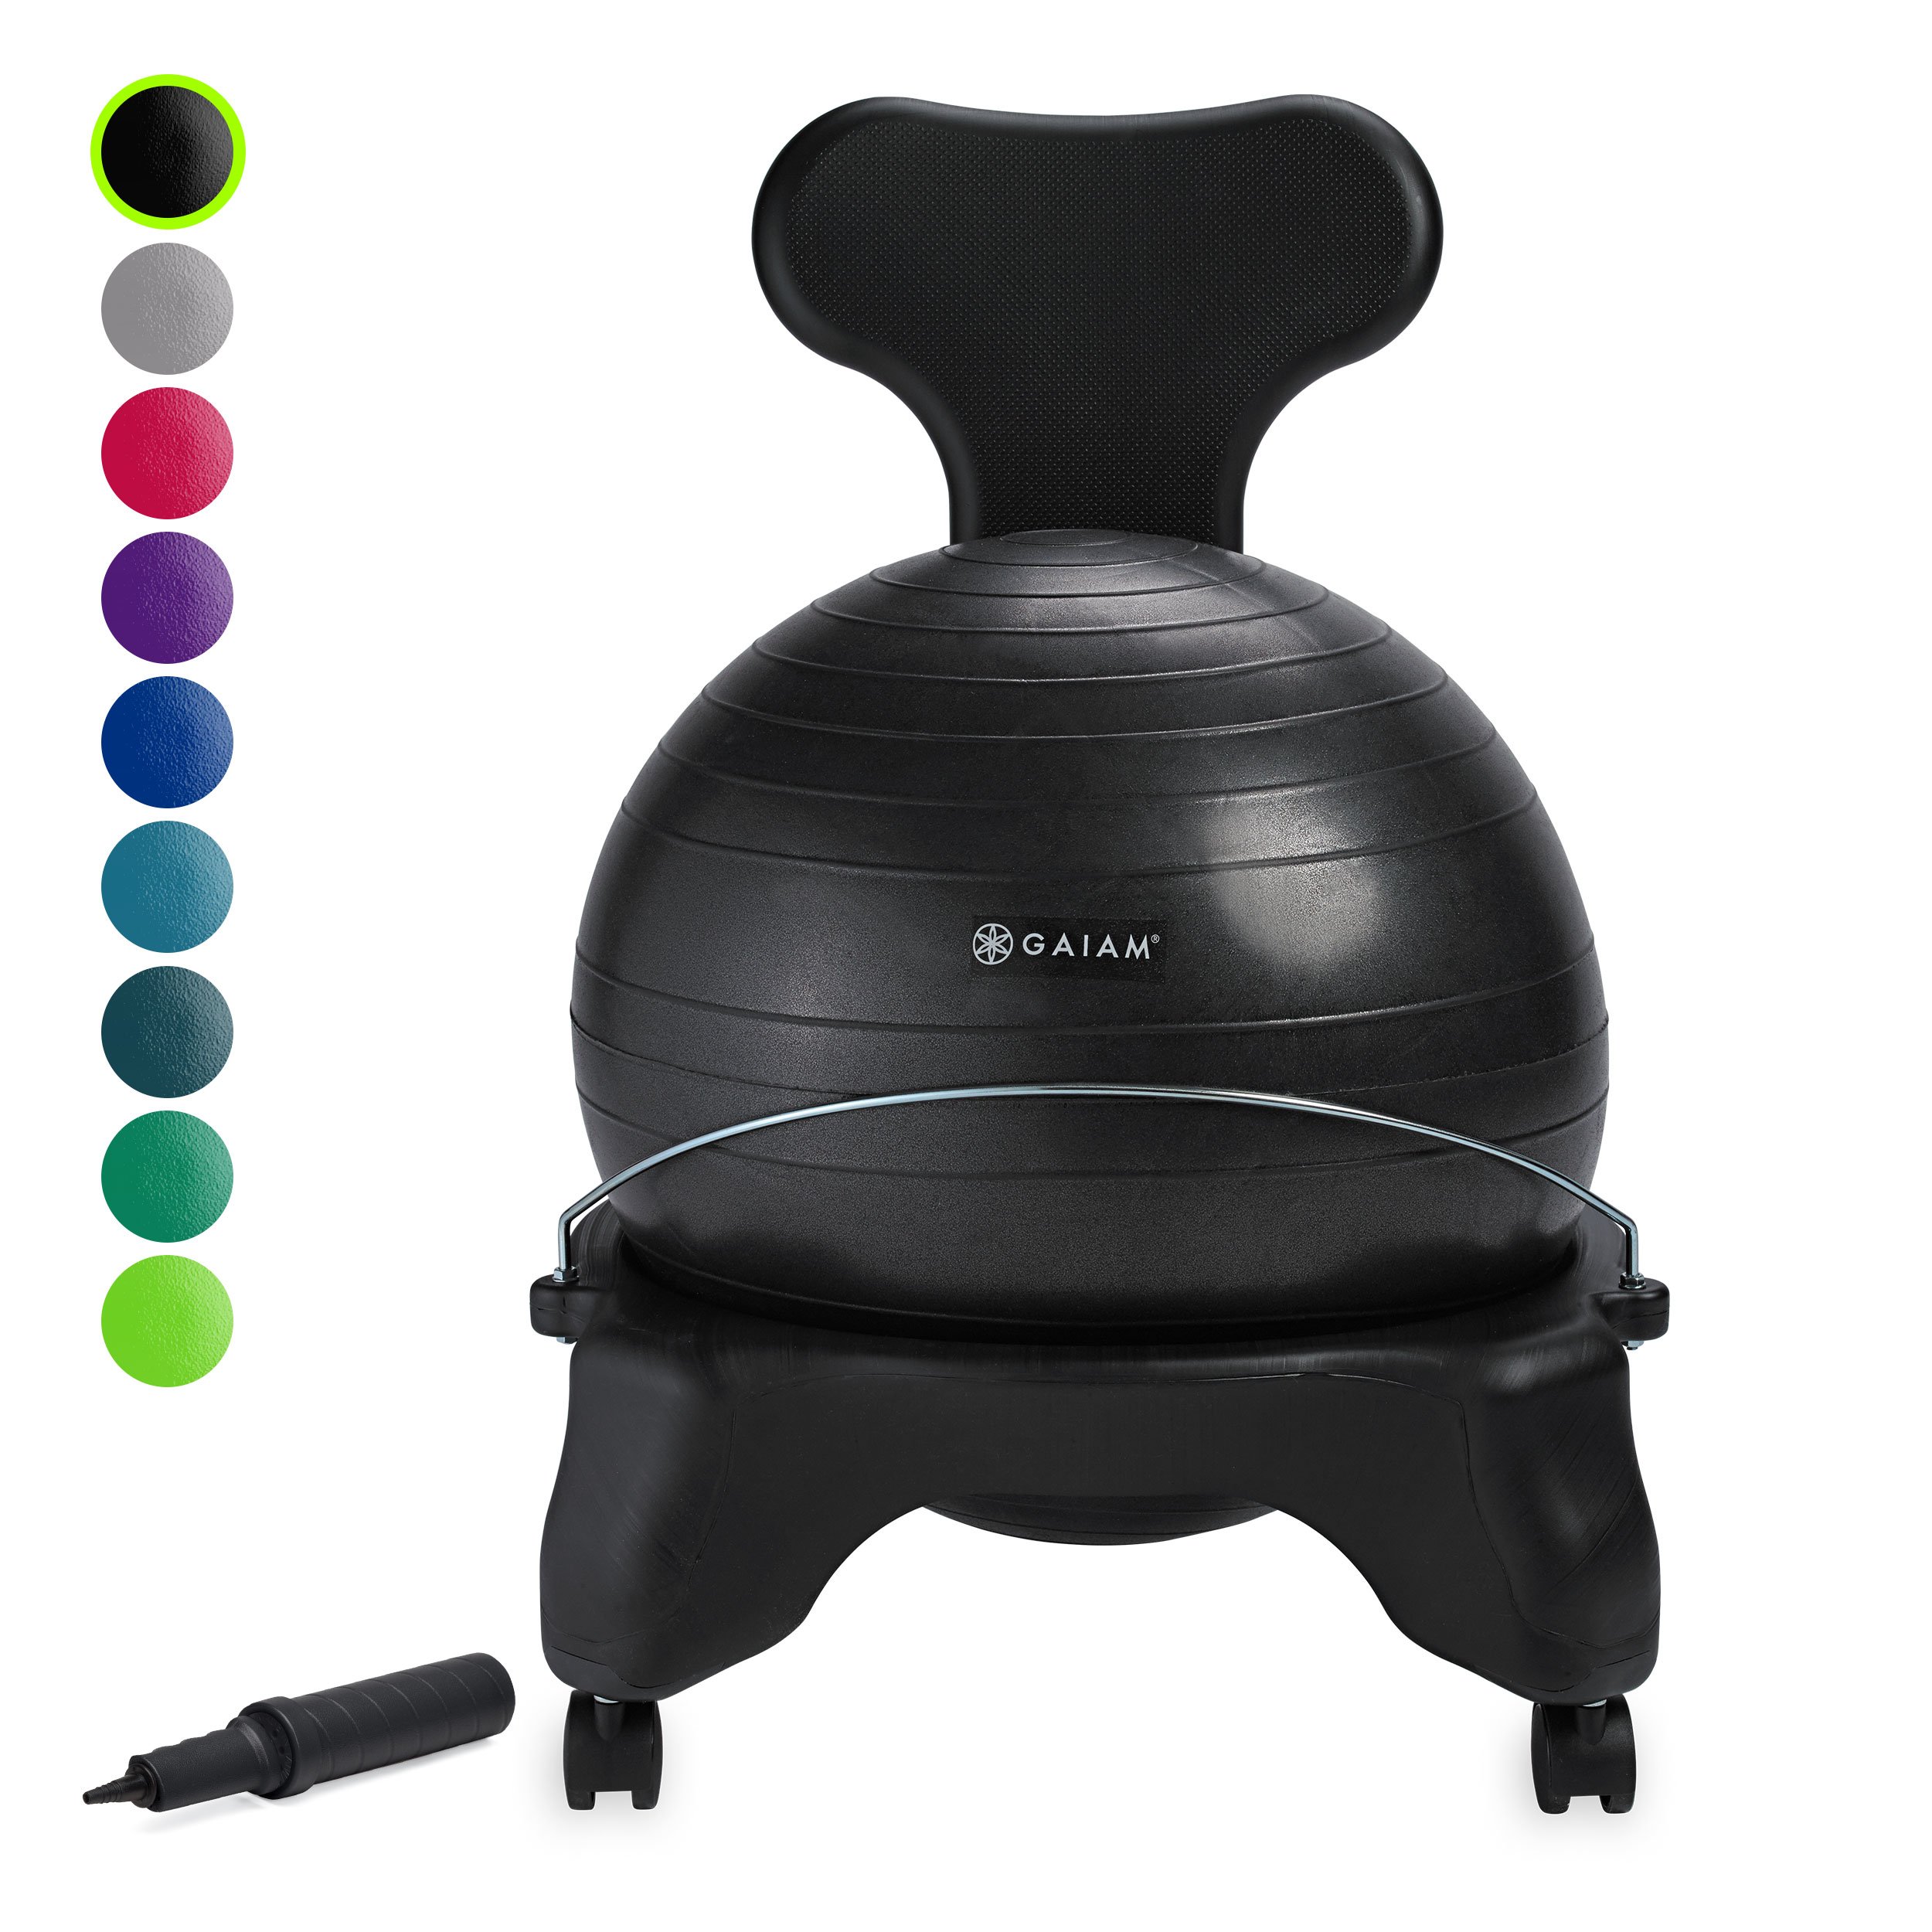 Gaiam Classic Balance Ball Chair - Exercise Stability Yoga Ball Premium Ergonomic Chair for Home and Office with Air Pump, Exercise Guide, and Satisfaction Guarantee, Charcoal.